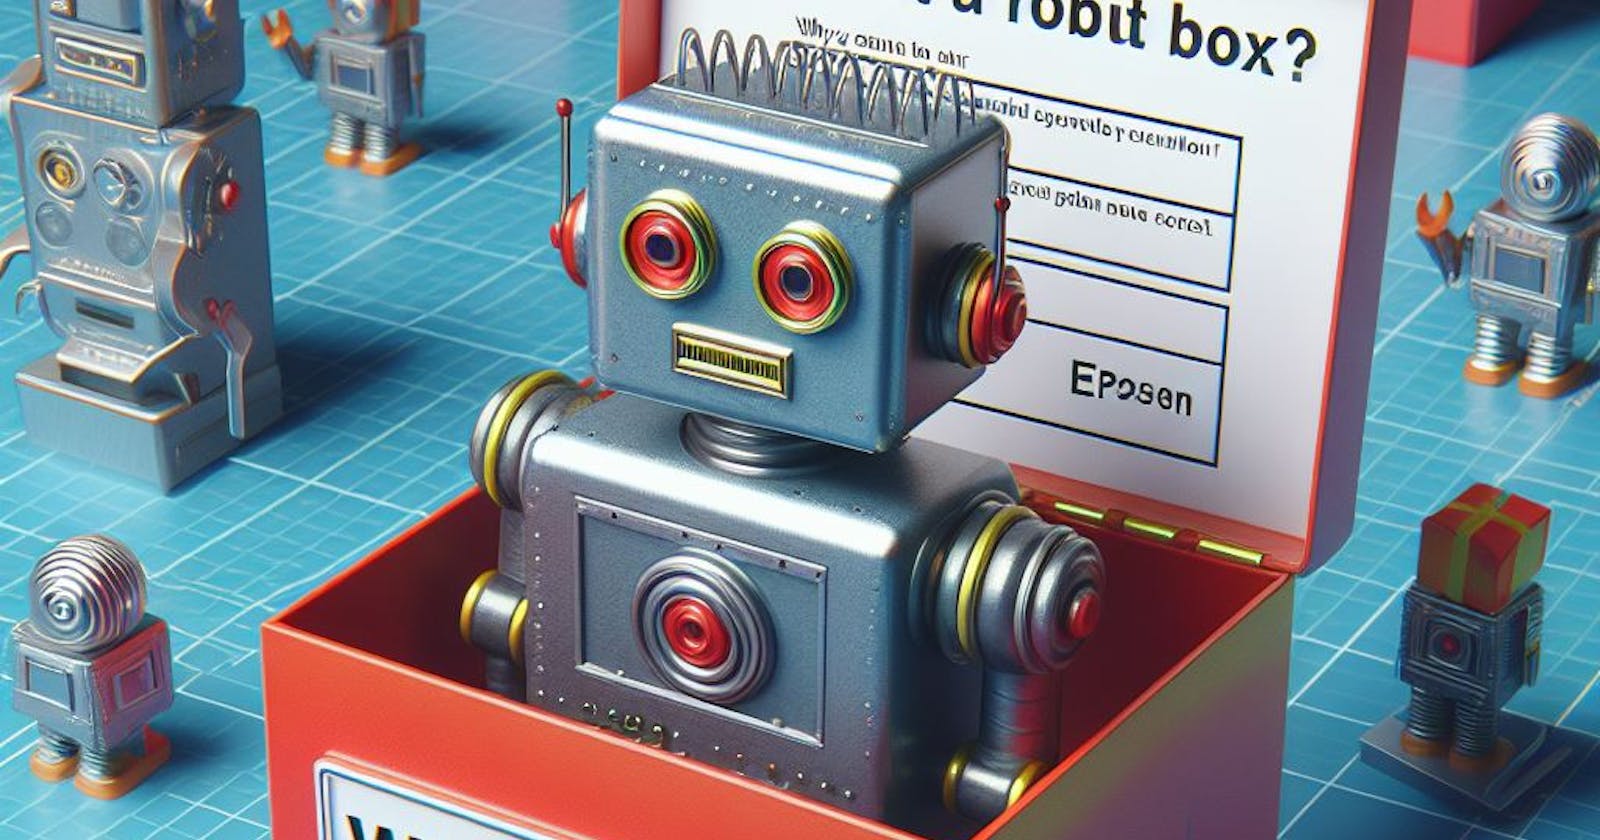 Why can't robots check the 'I'm Not a Robot' box?